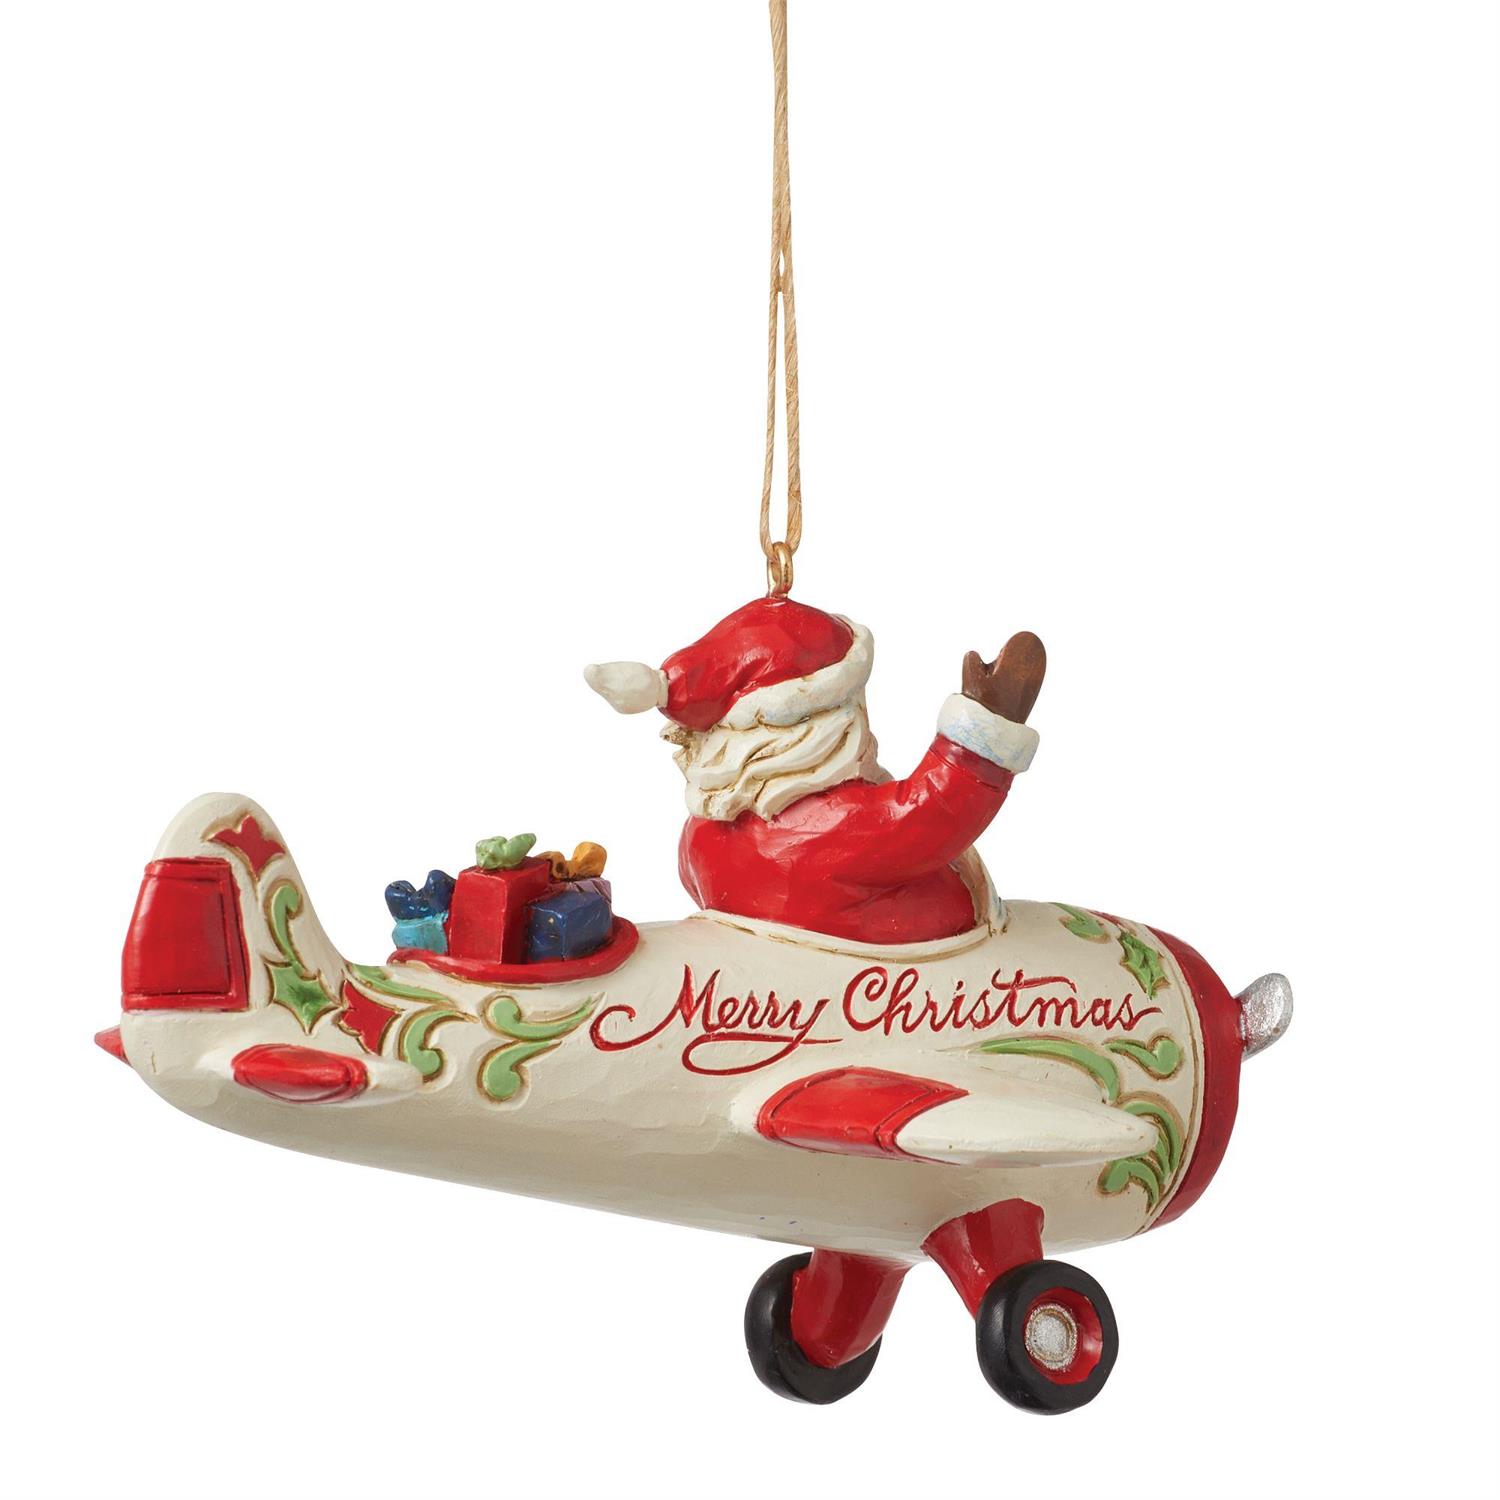 Enesco Gifts Jim Shore Heartwood Creek Santa in Airplane Ornament Free Shipping Iveys Gifts And Decor